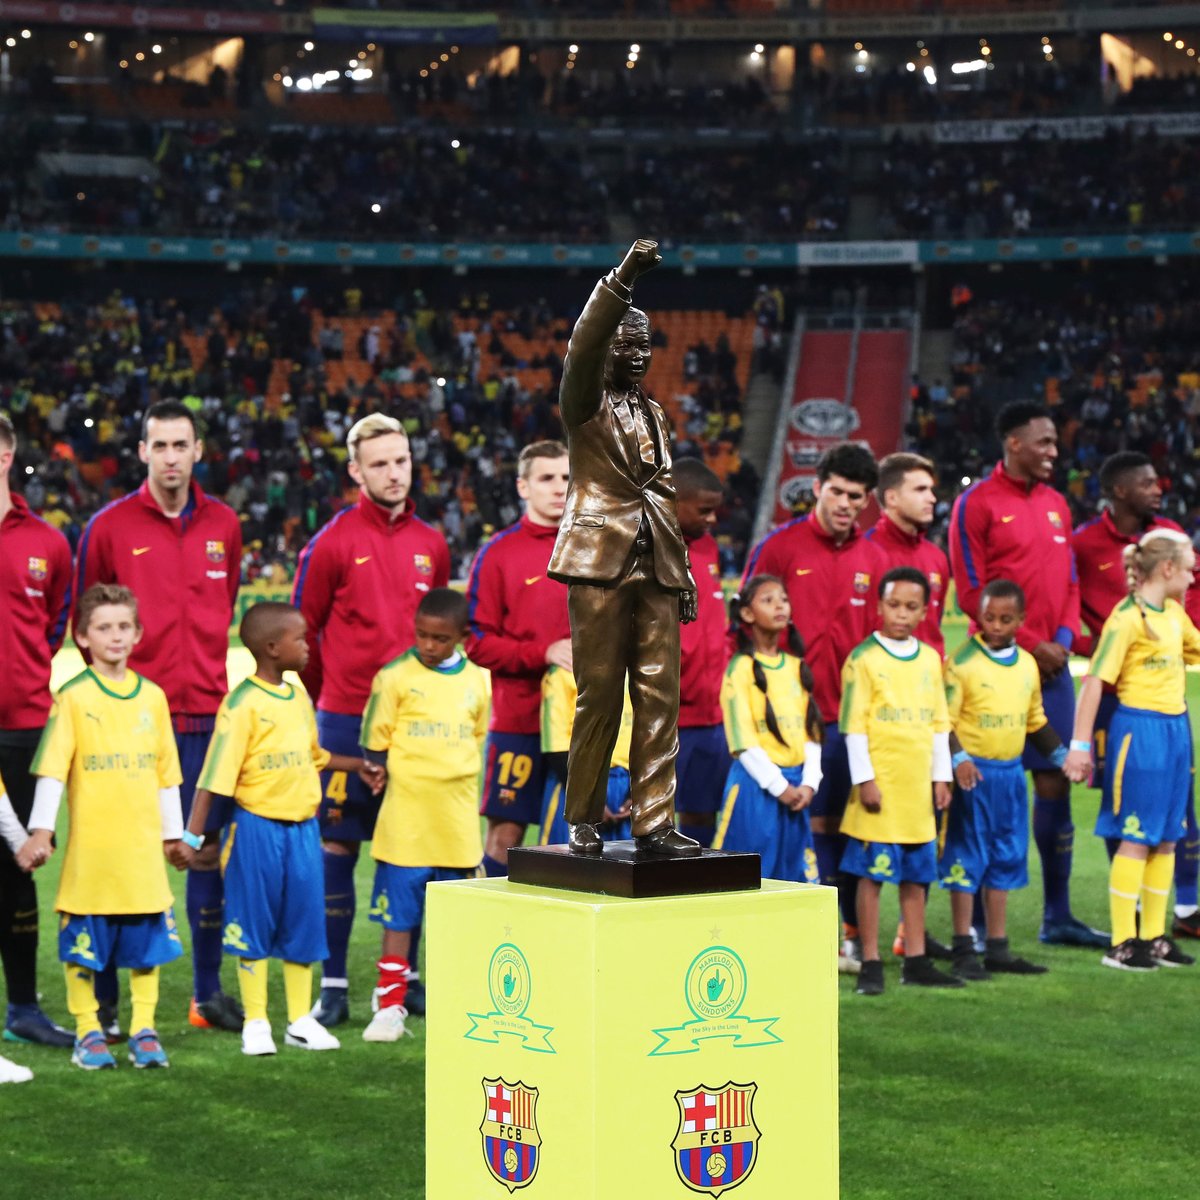 1.	Spanish club Barcelona line up behind the Nelson Mandela Centenary trophy before their clash with PSL winners Mamelodi Sundowns at FNB Stadium in Johannesburg on Wednesday, 16 May 2018. (Picture: Mamelodi Sundowns Facebook page)